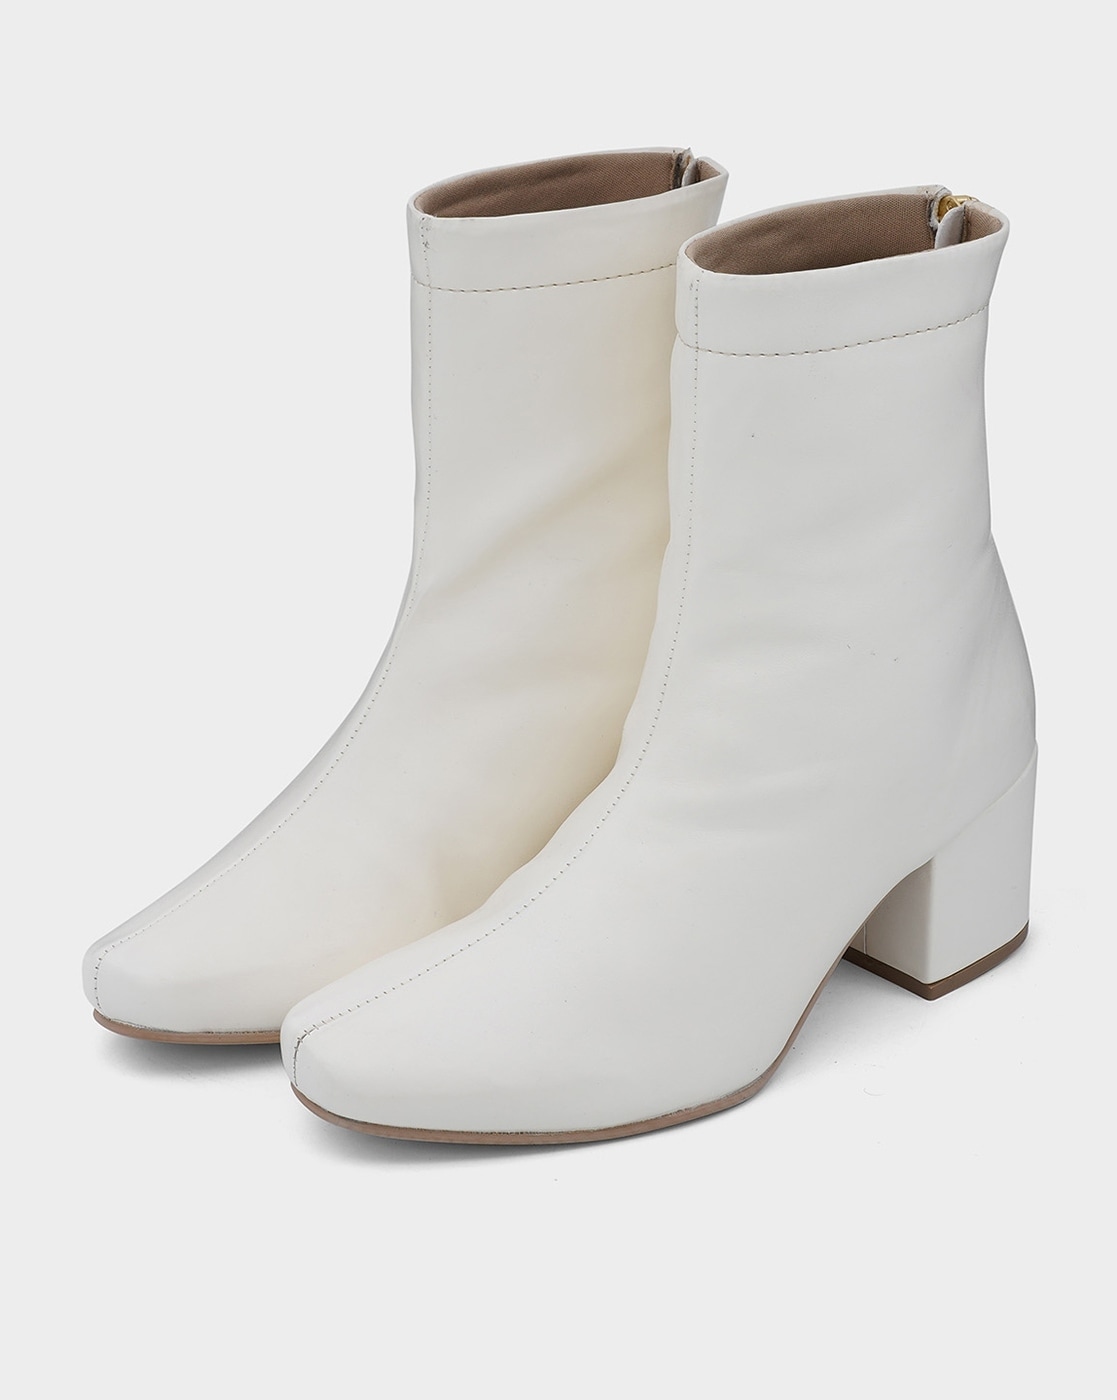 RAID Recruit Block Heeled Ankle Boot in White